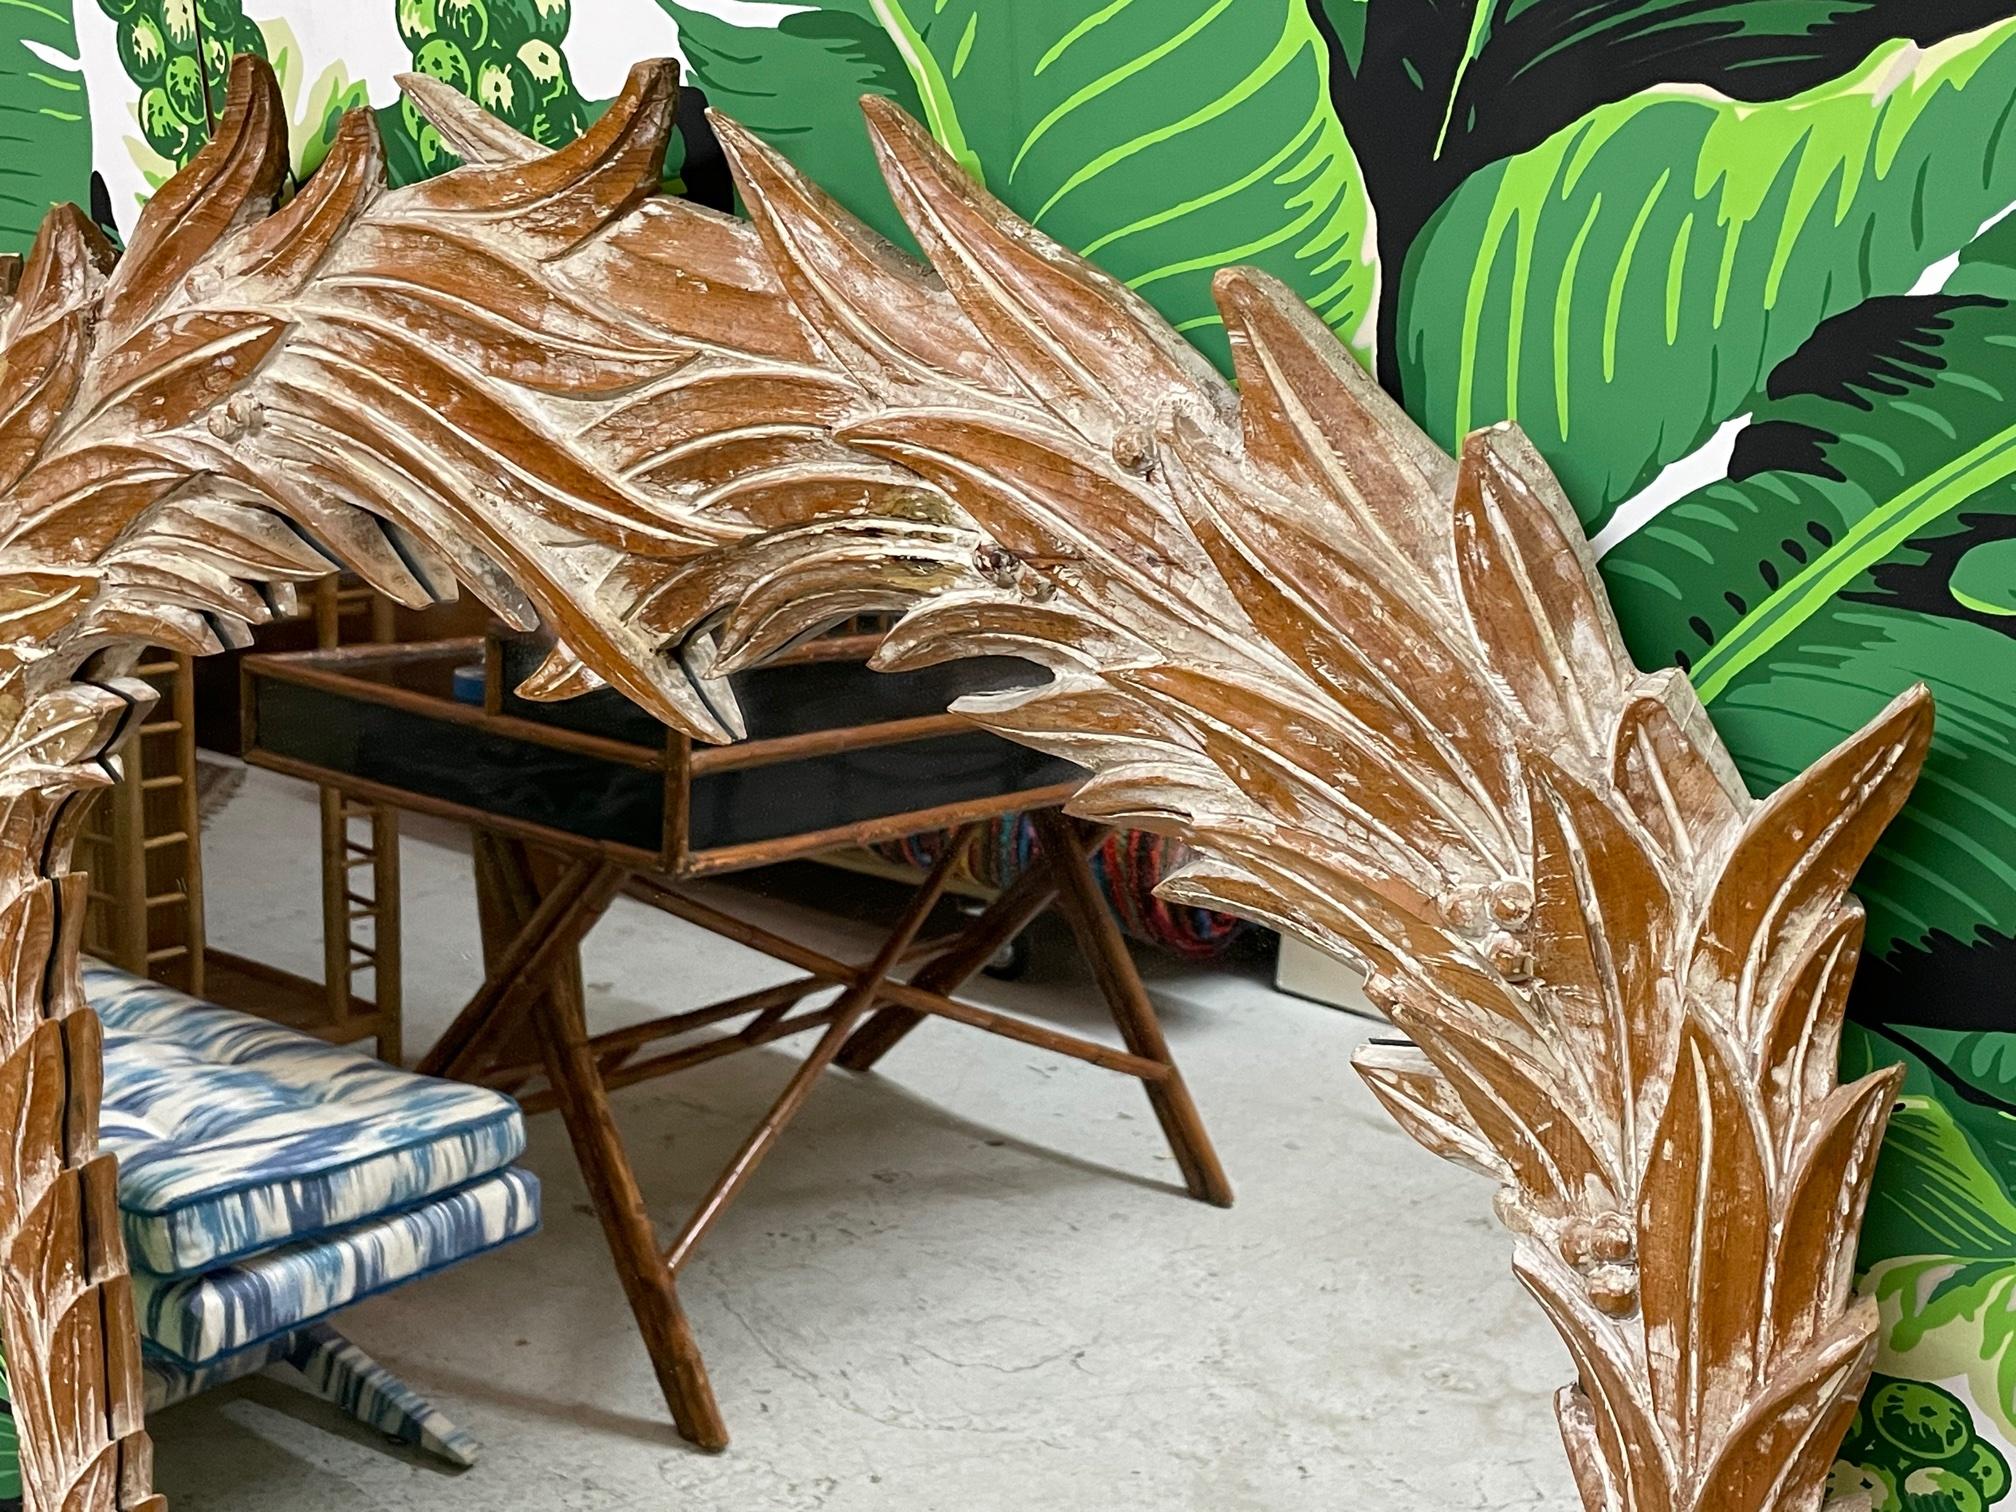 Vintage wall mirror in a palm frond motif by Serge Roche. Similar to styles of Dorothy Draper or John Dickinson. Carved wood in a cerused finish. Marked 